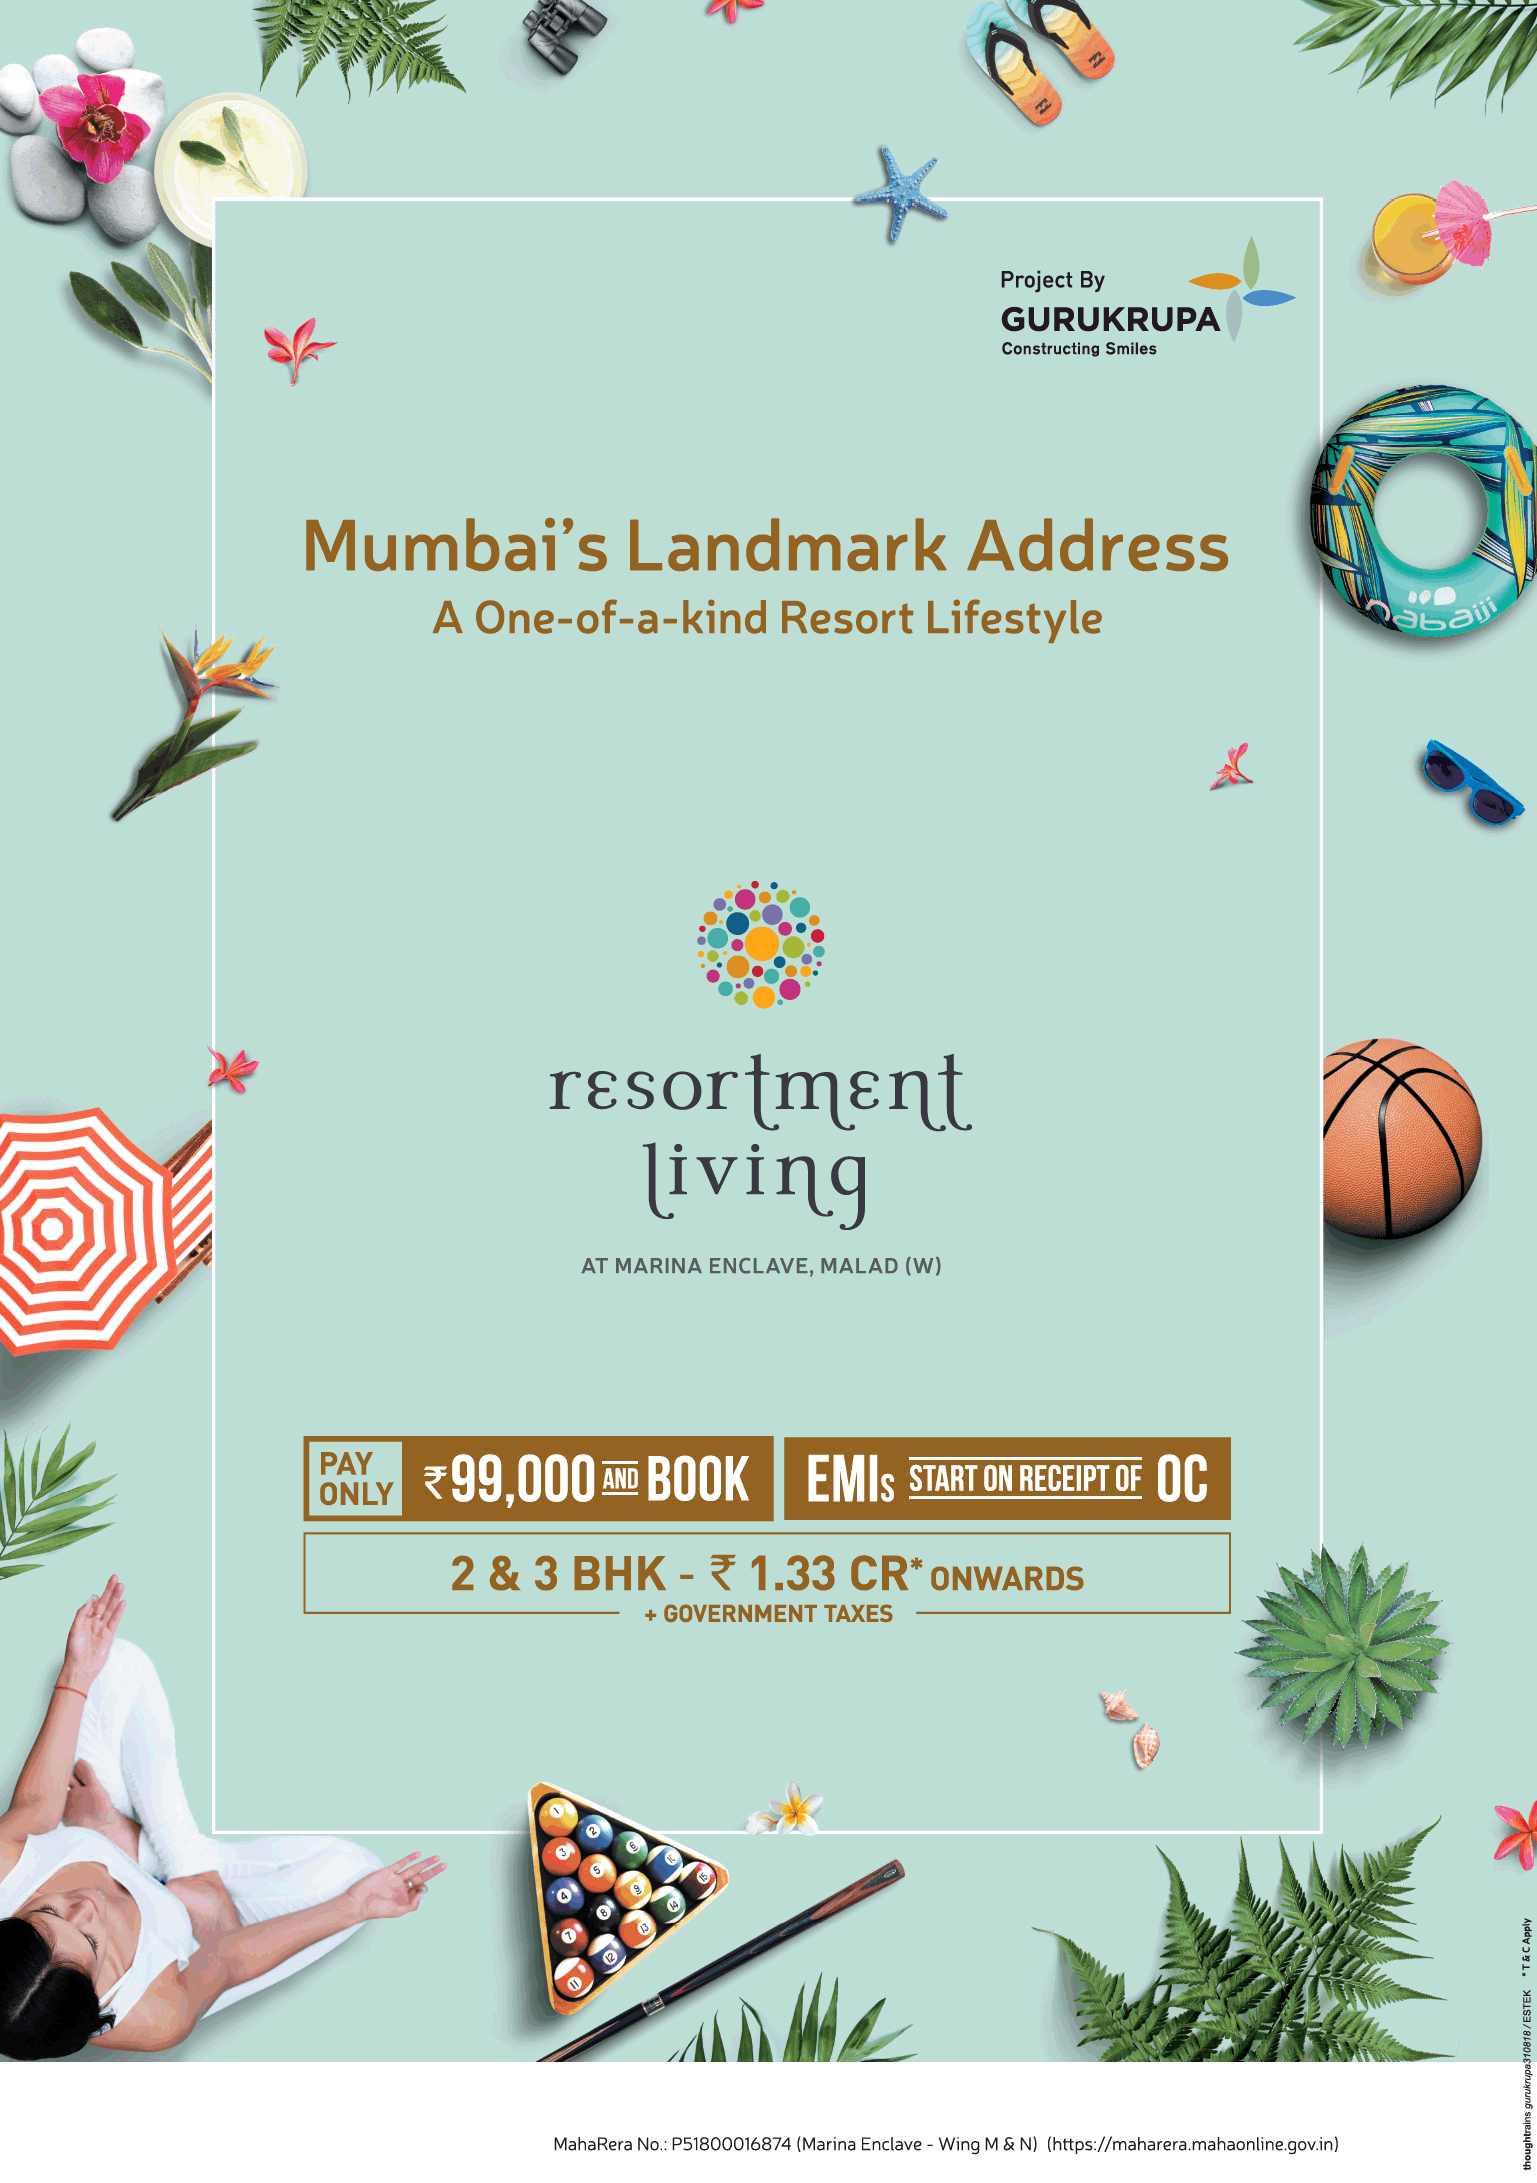 Pay only Rs. 99000 and book your home at Gurukrupa Resortment Living in Mumbai Update